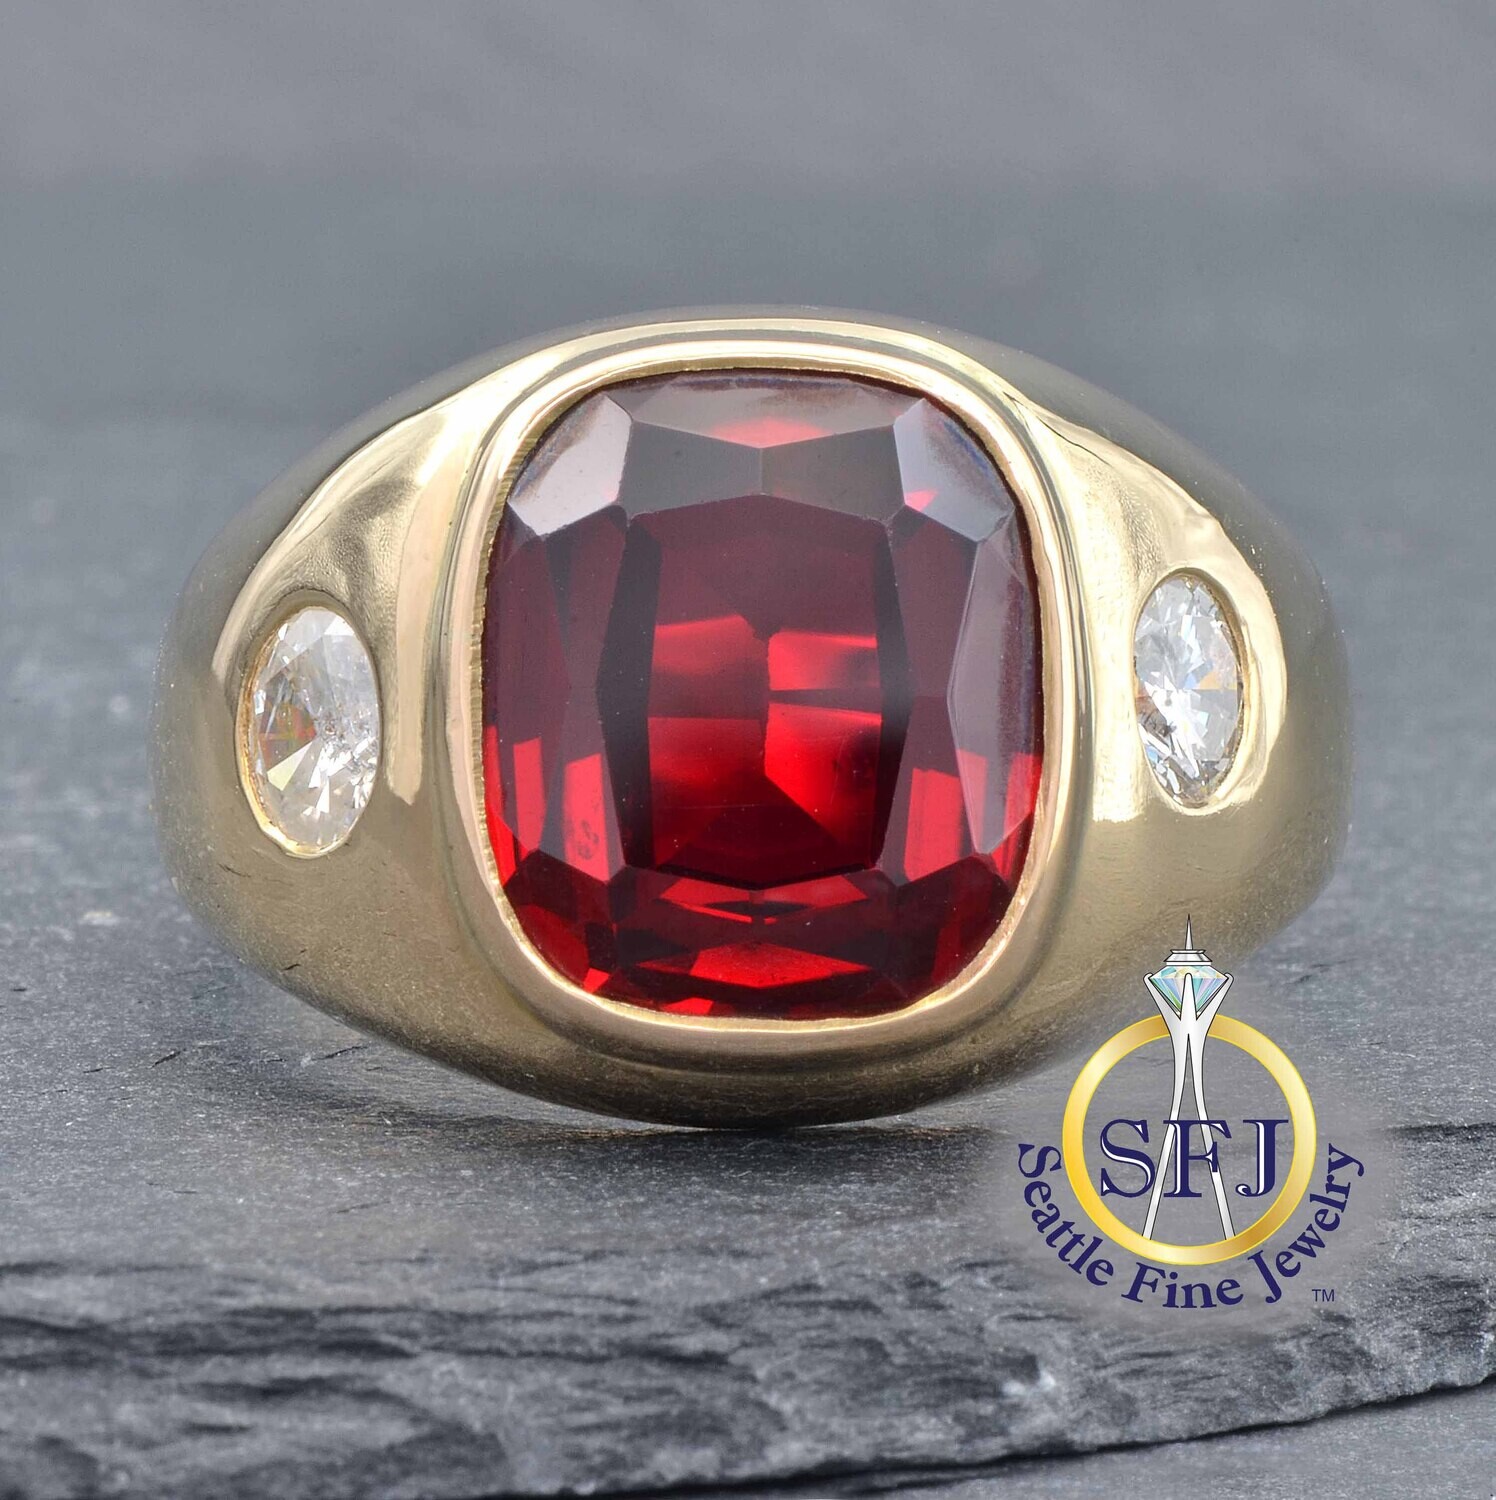 Ruby Accented Ring, Solid 14k Yellow Gold